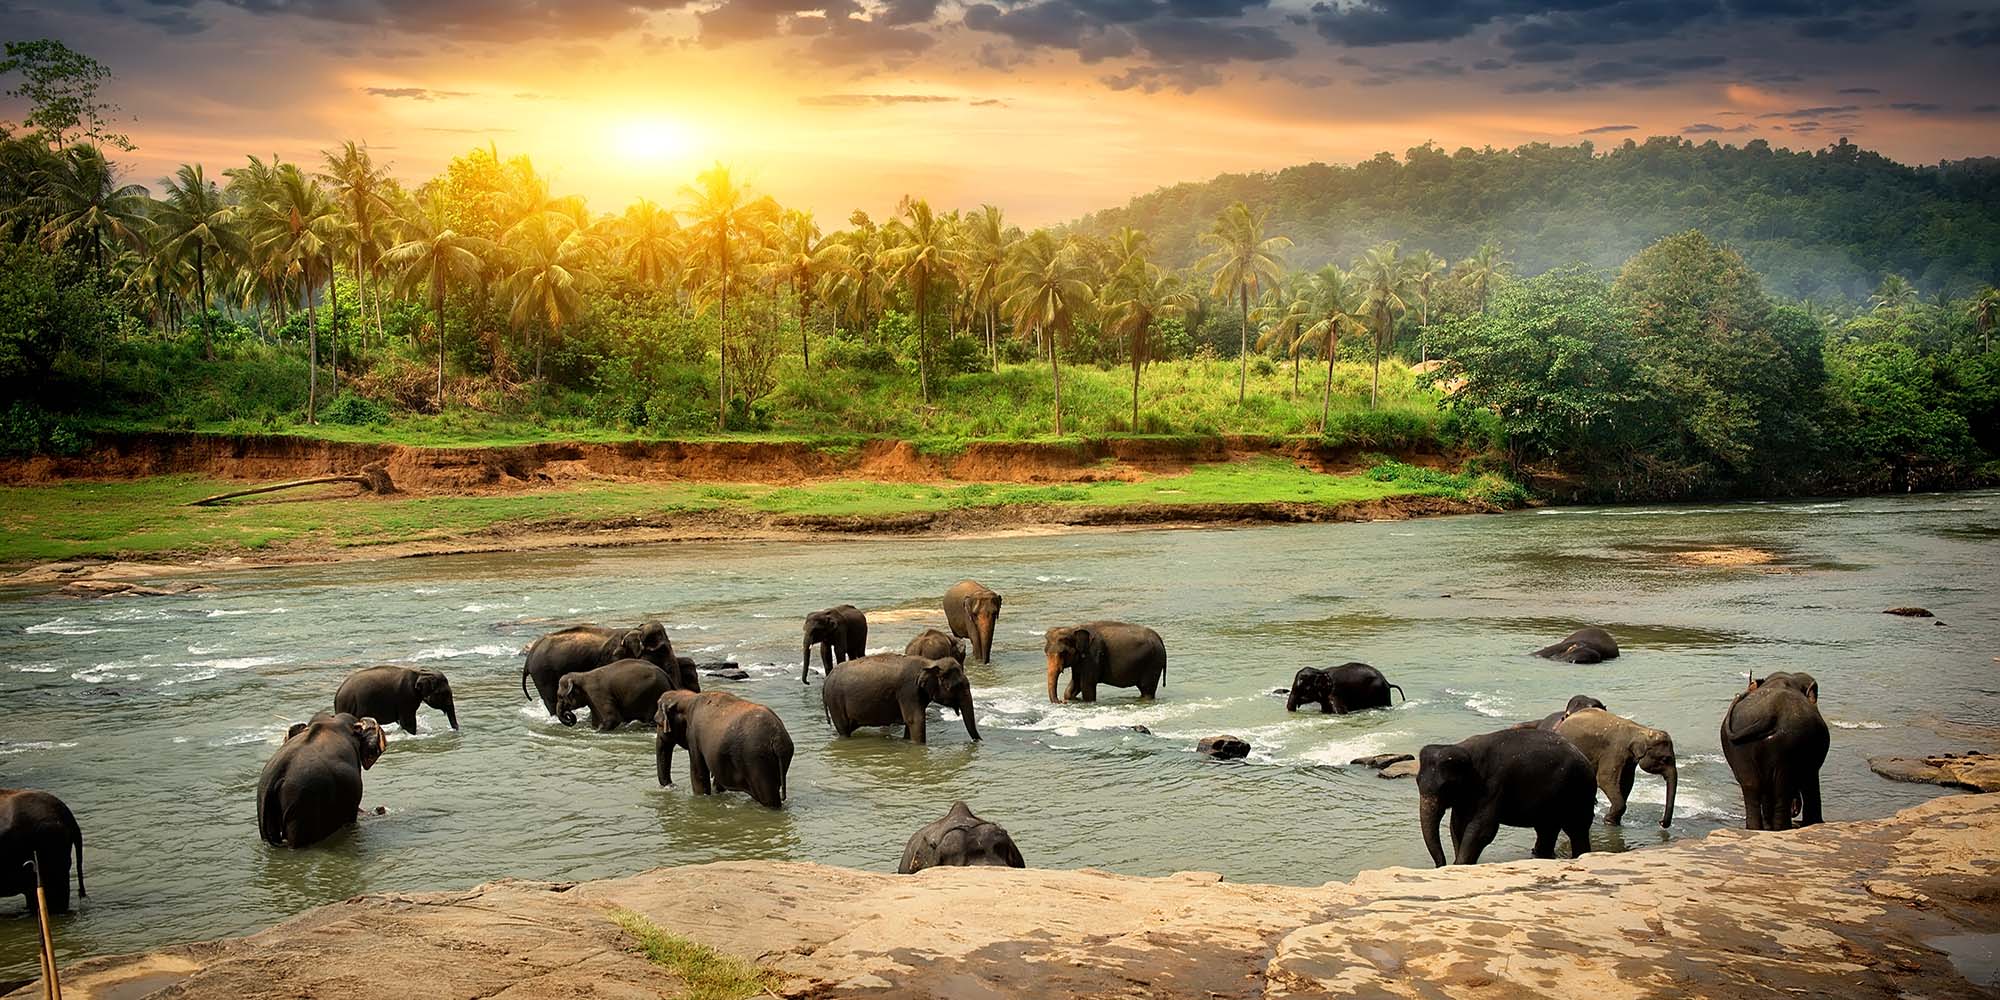 7 Must-See Attractions For Your Sri Lanka Holiday